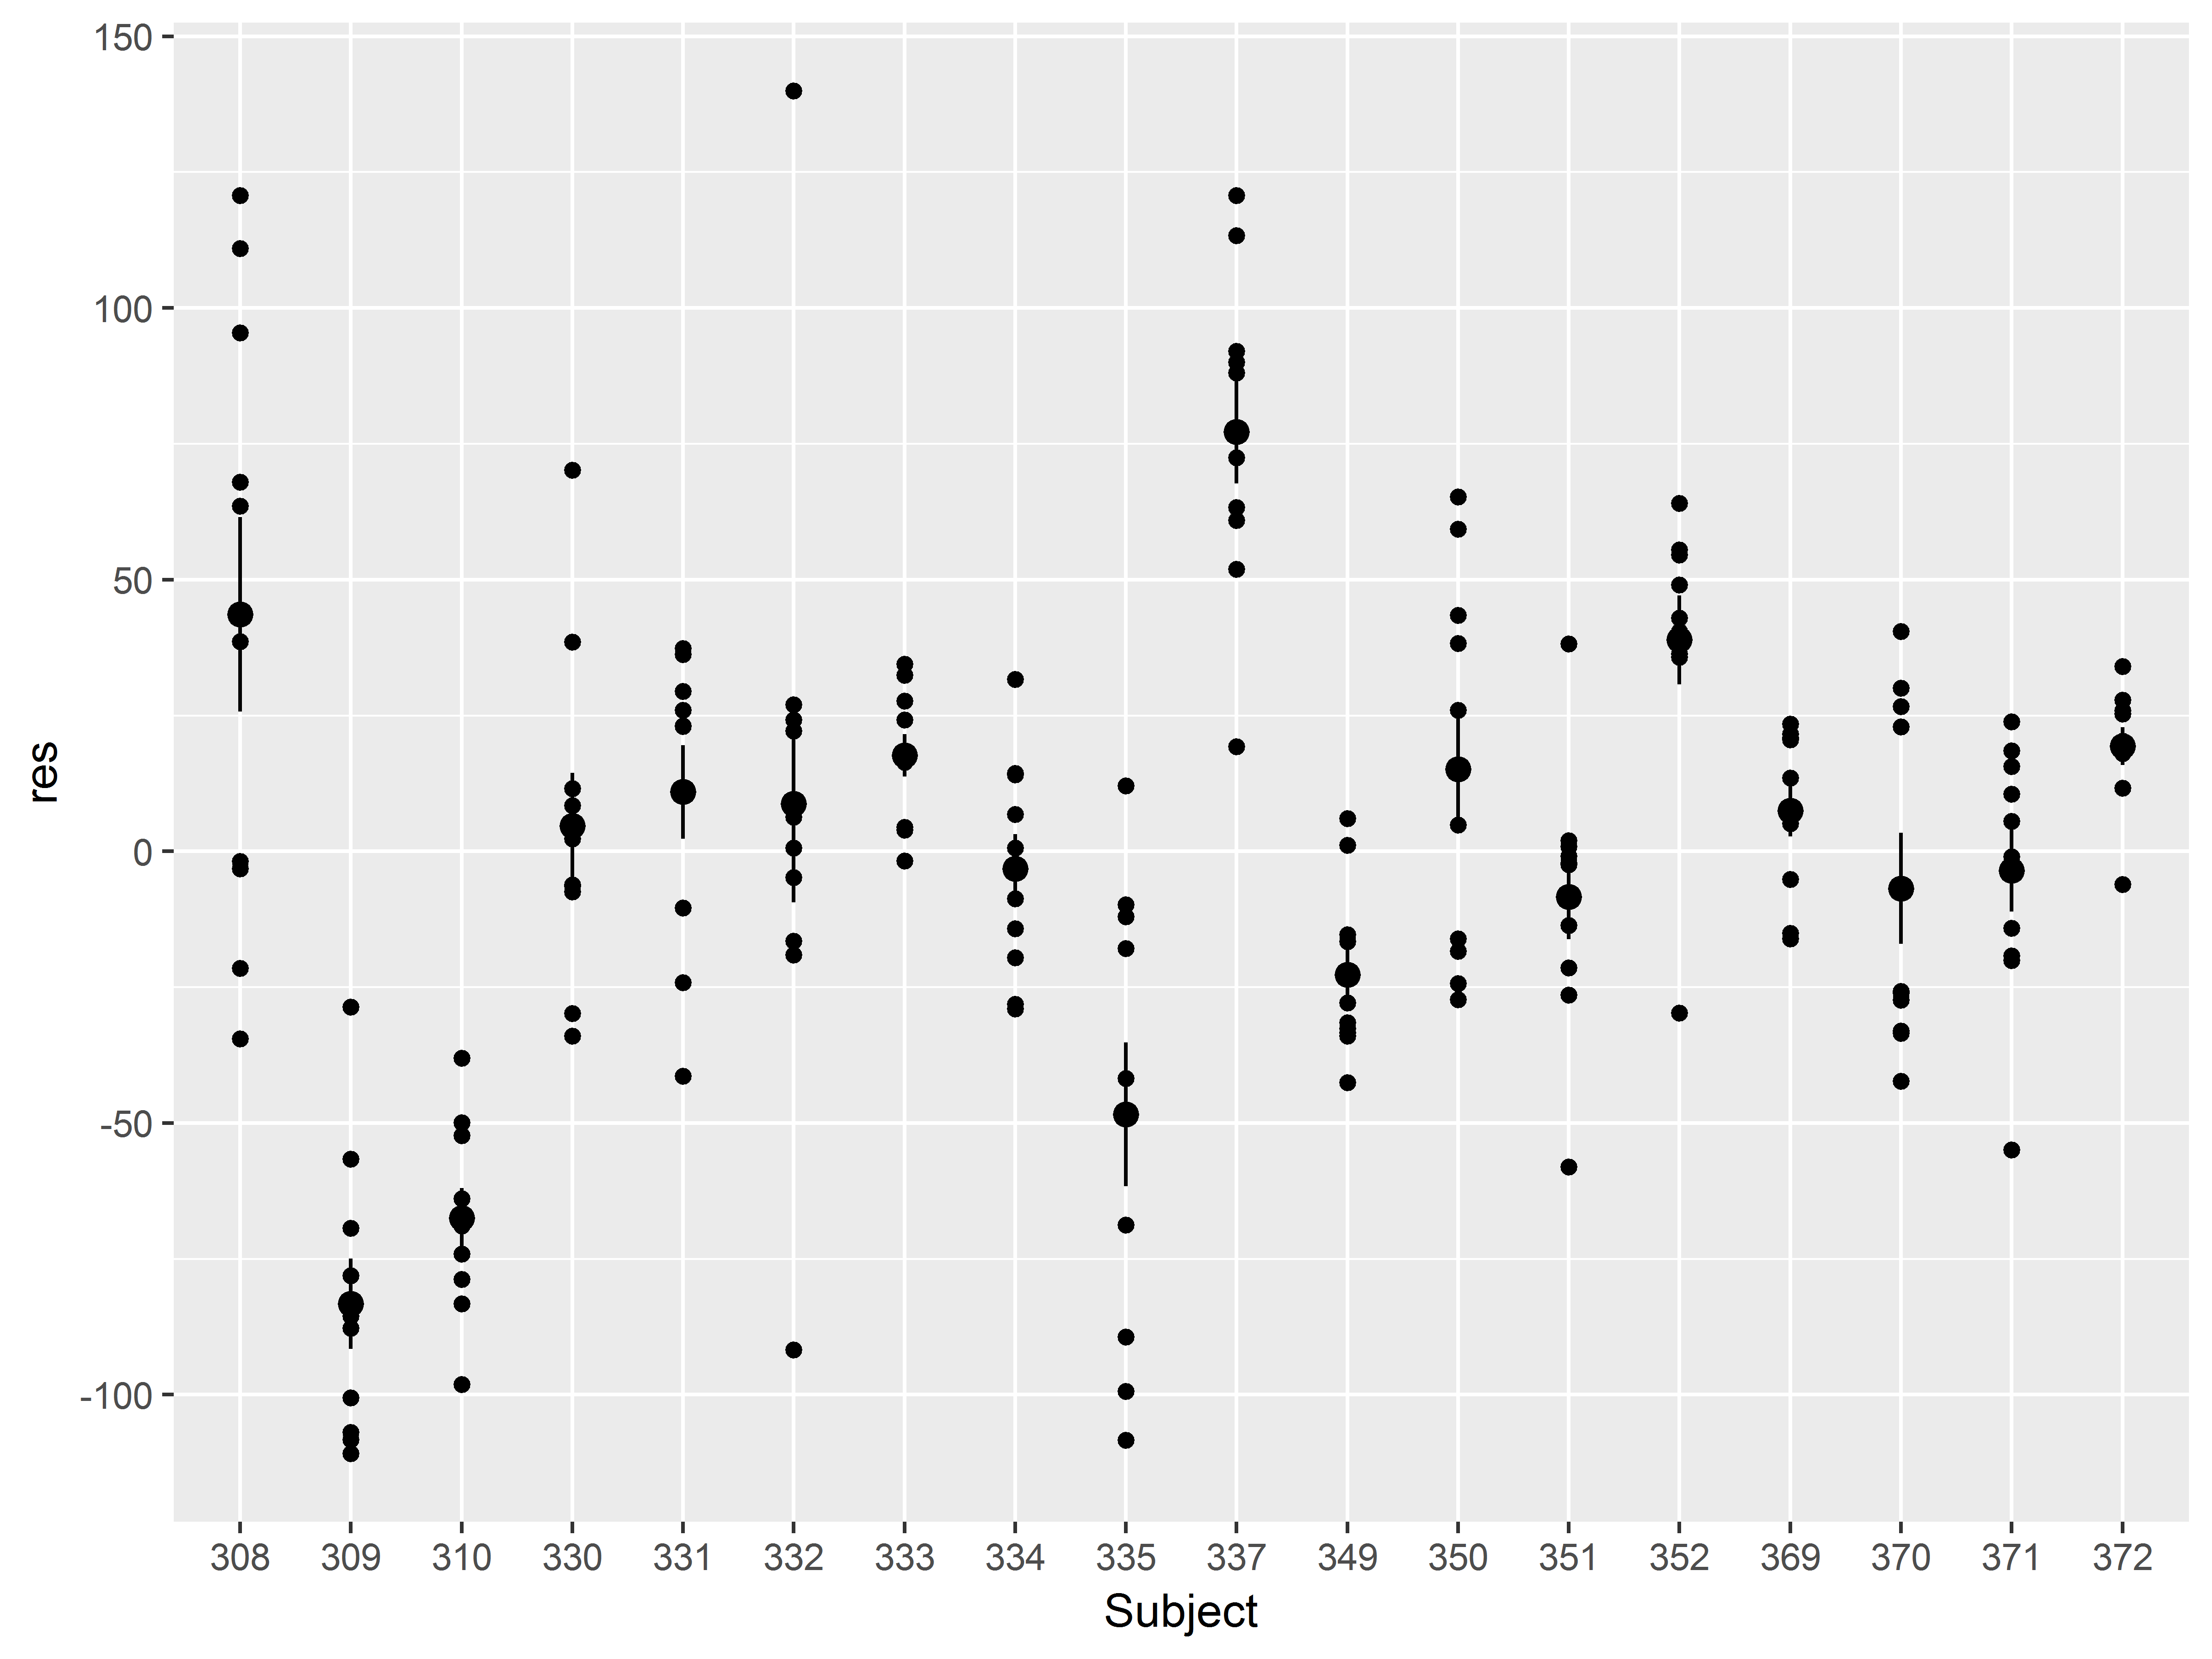 Fig 4.4b residuals by Subject, with means and s.e.